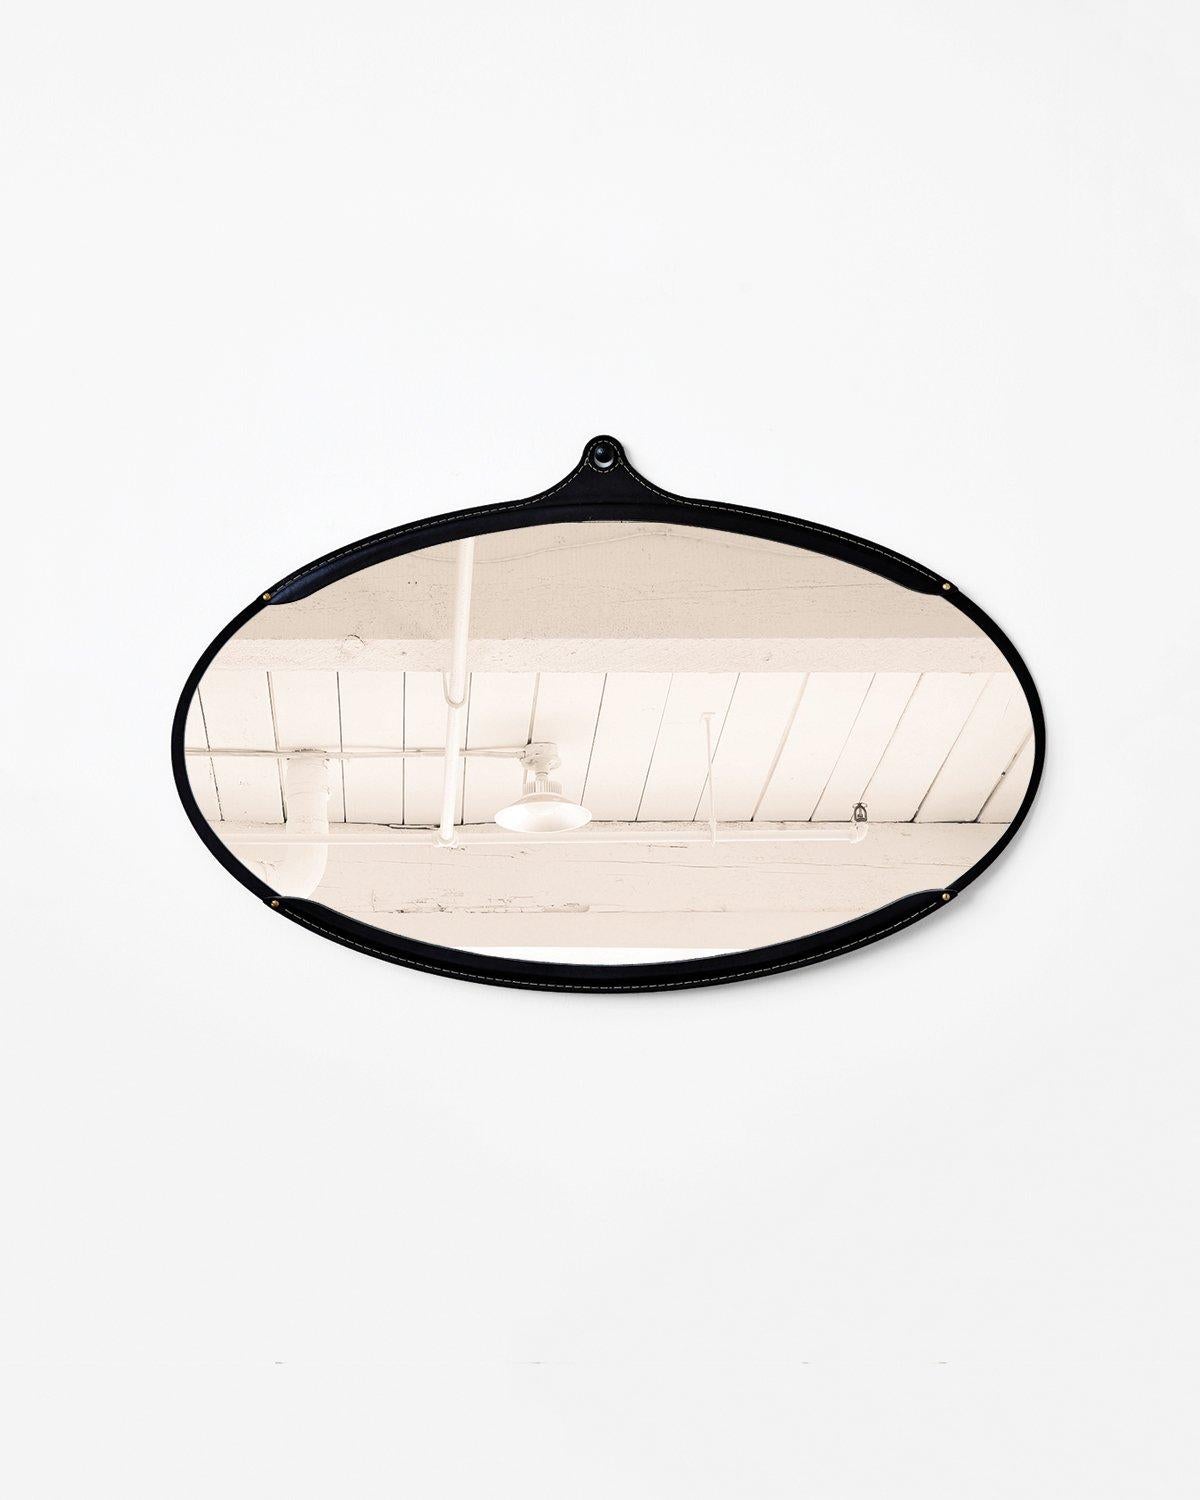 The fairmount wide oval mirror is a hand-stitched leather mirror. Each piece of leather has its own character and variations lending to the appeal of the material. The mirror sits inside the frame like a pocket and comes with an iron hand hammered